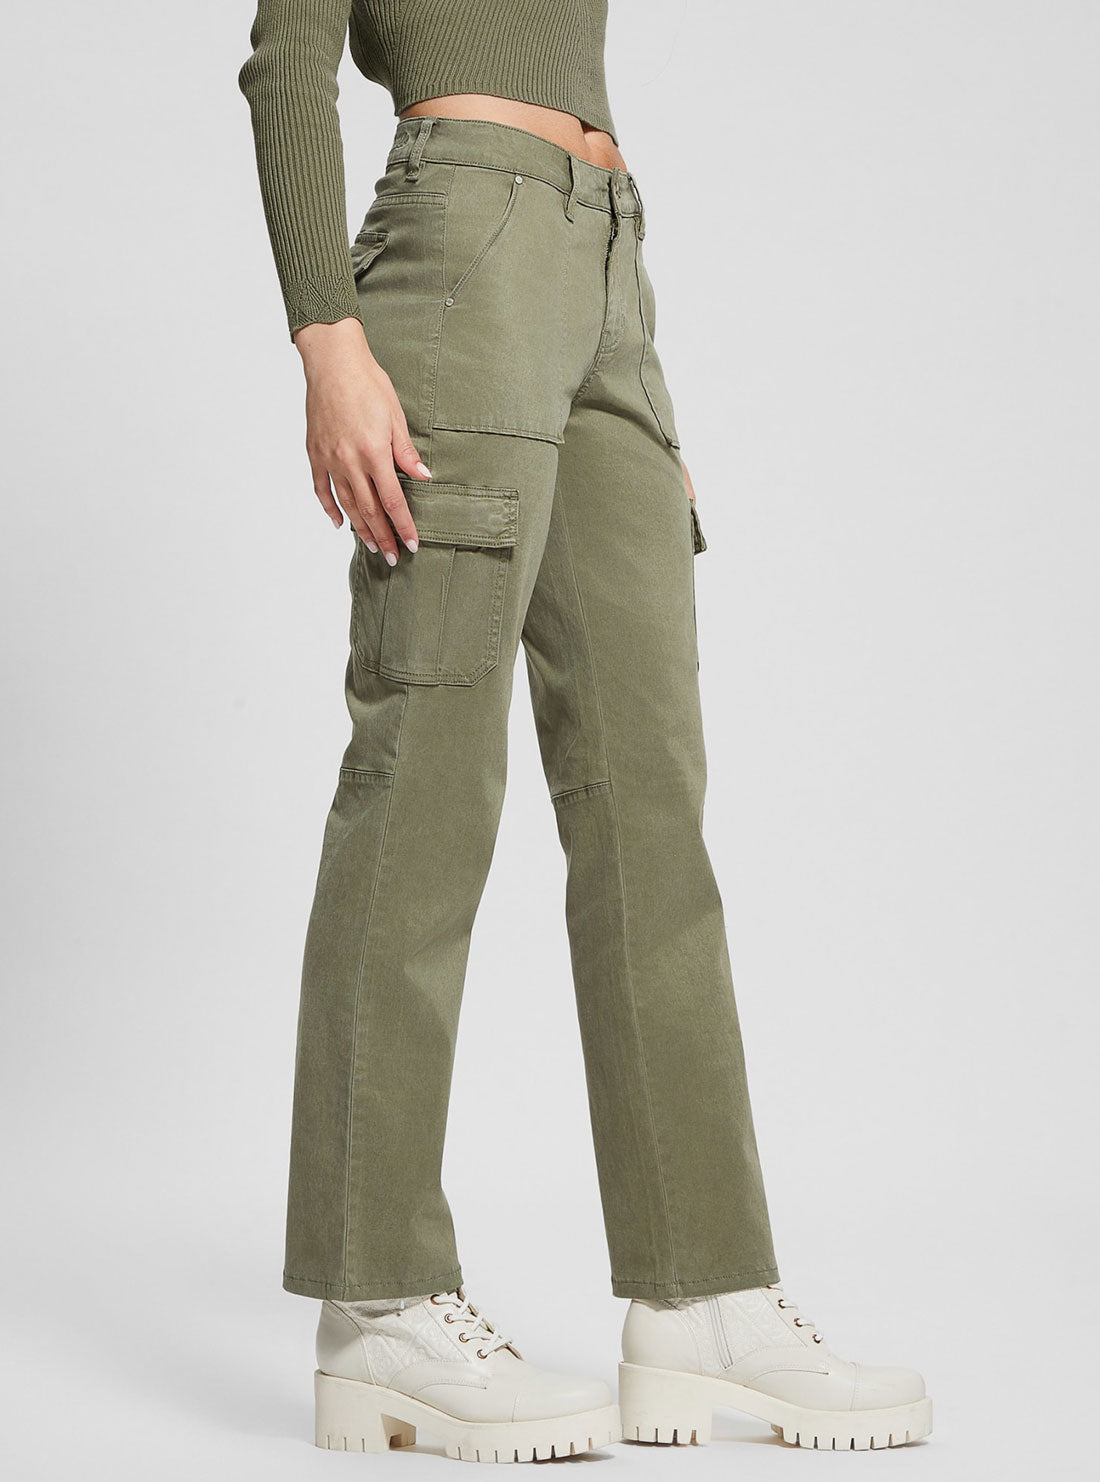 GUESS Green Straight-Leg Cargo Pants side view